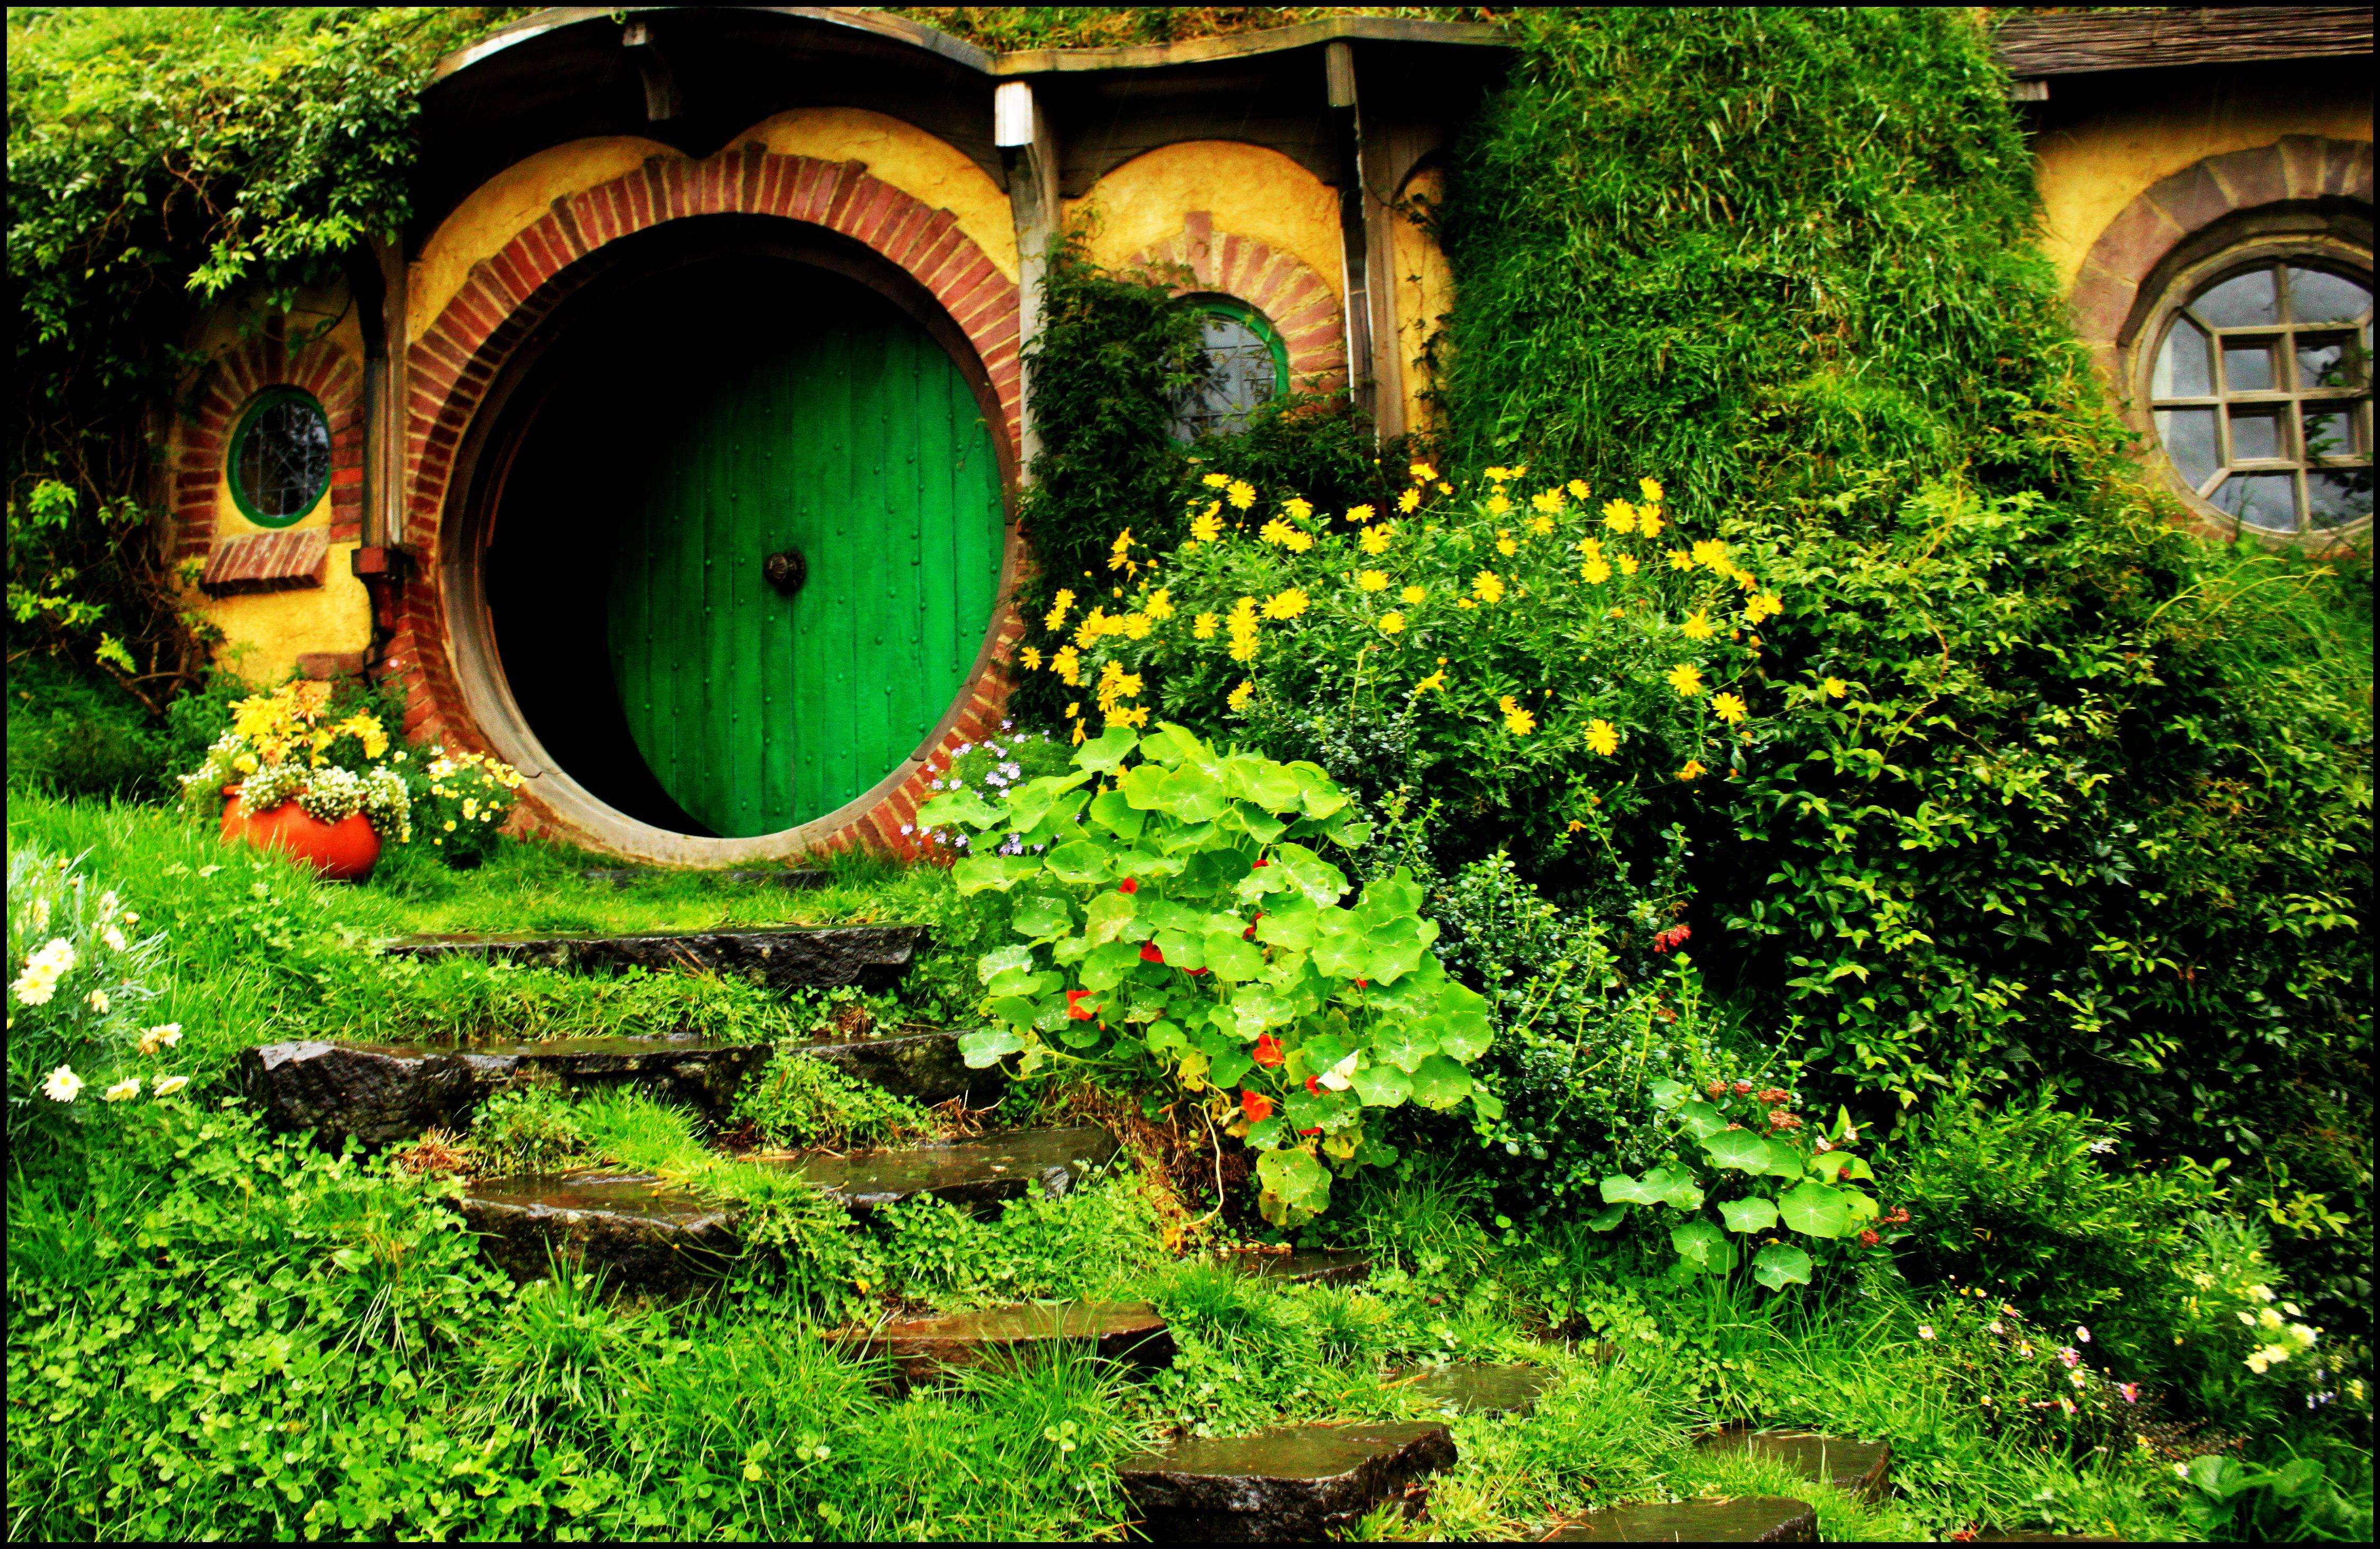 Bag End. Hobbit, Lord and Doors